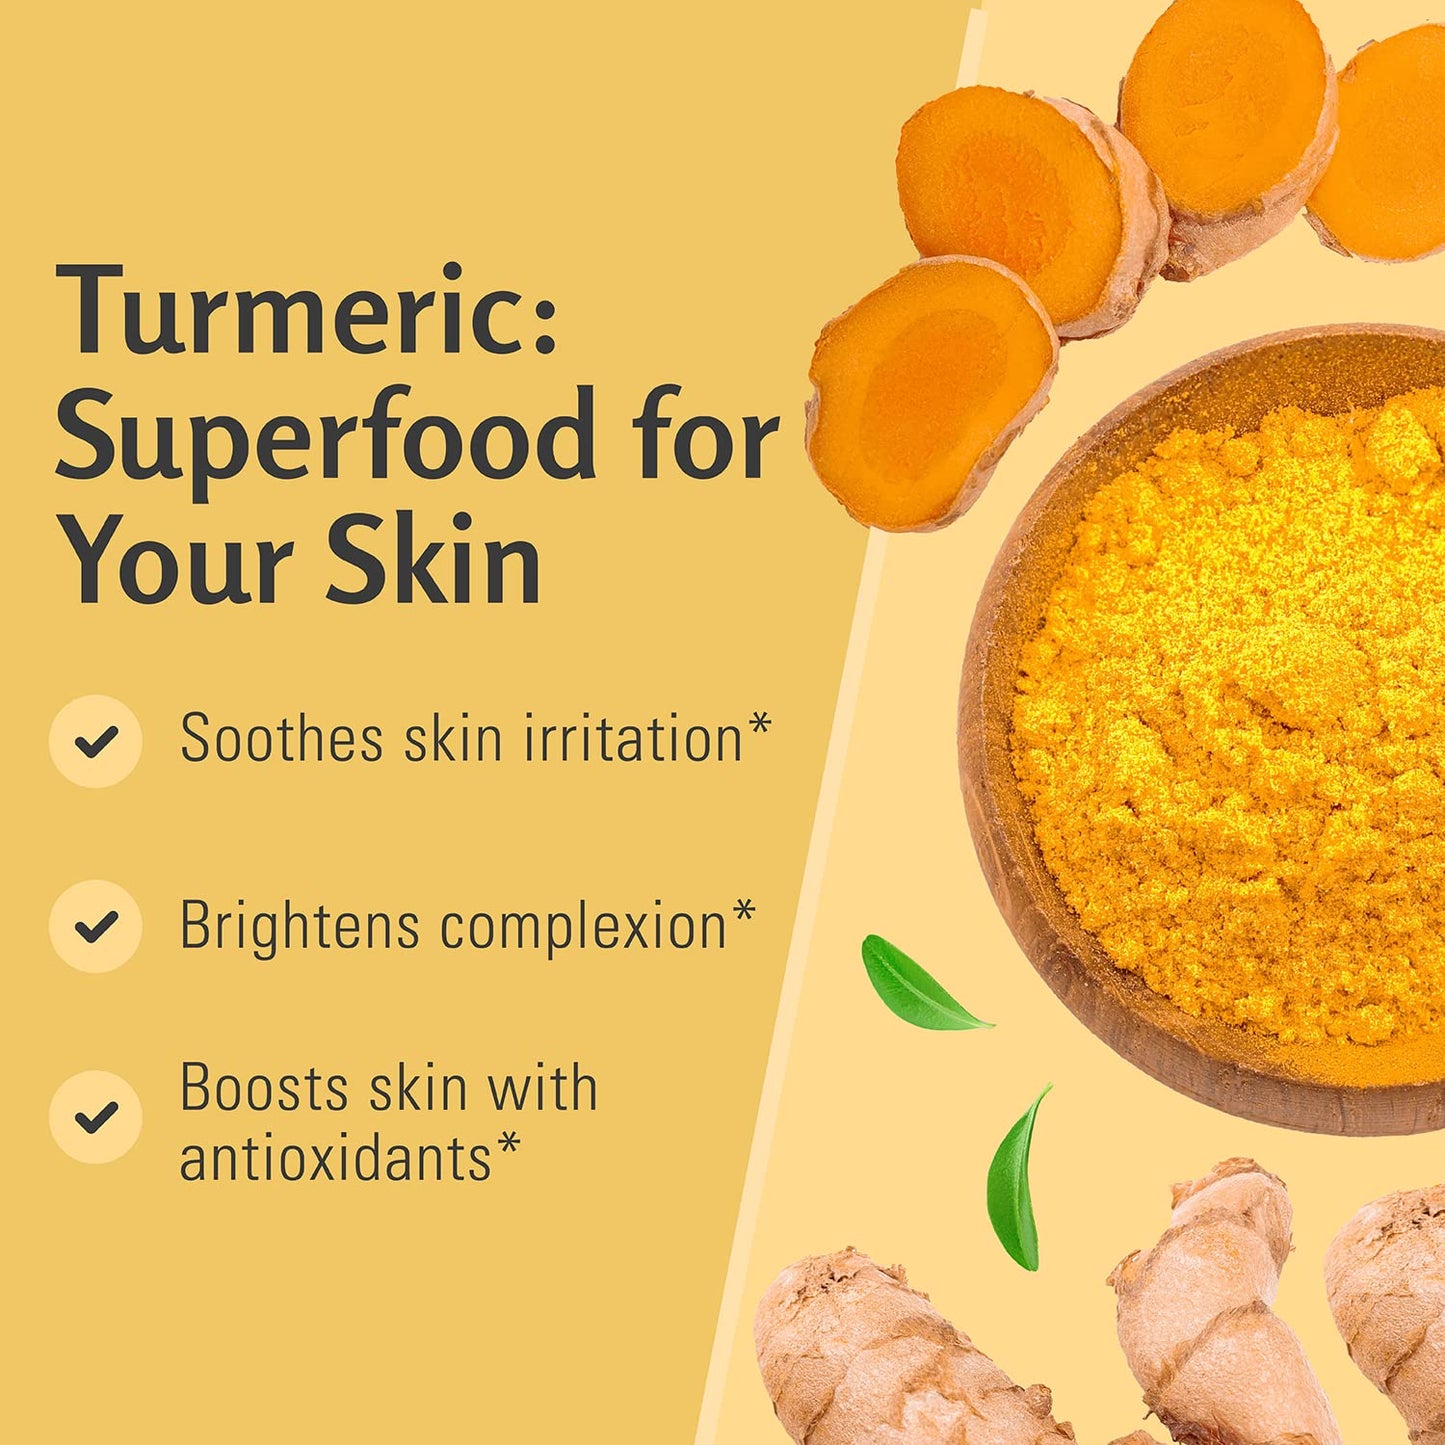 Exfoliating Turmeric Body Scrub and Skin Exfoliator with Collagen and Coconut Oil